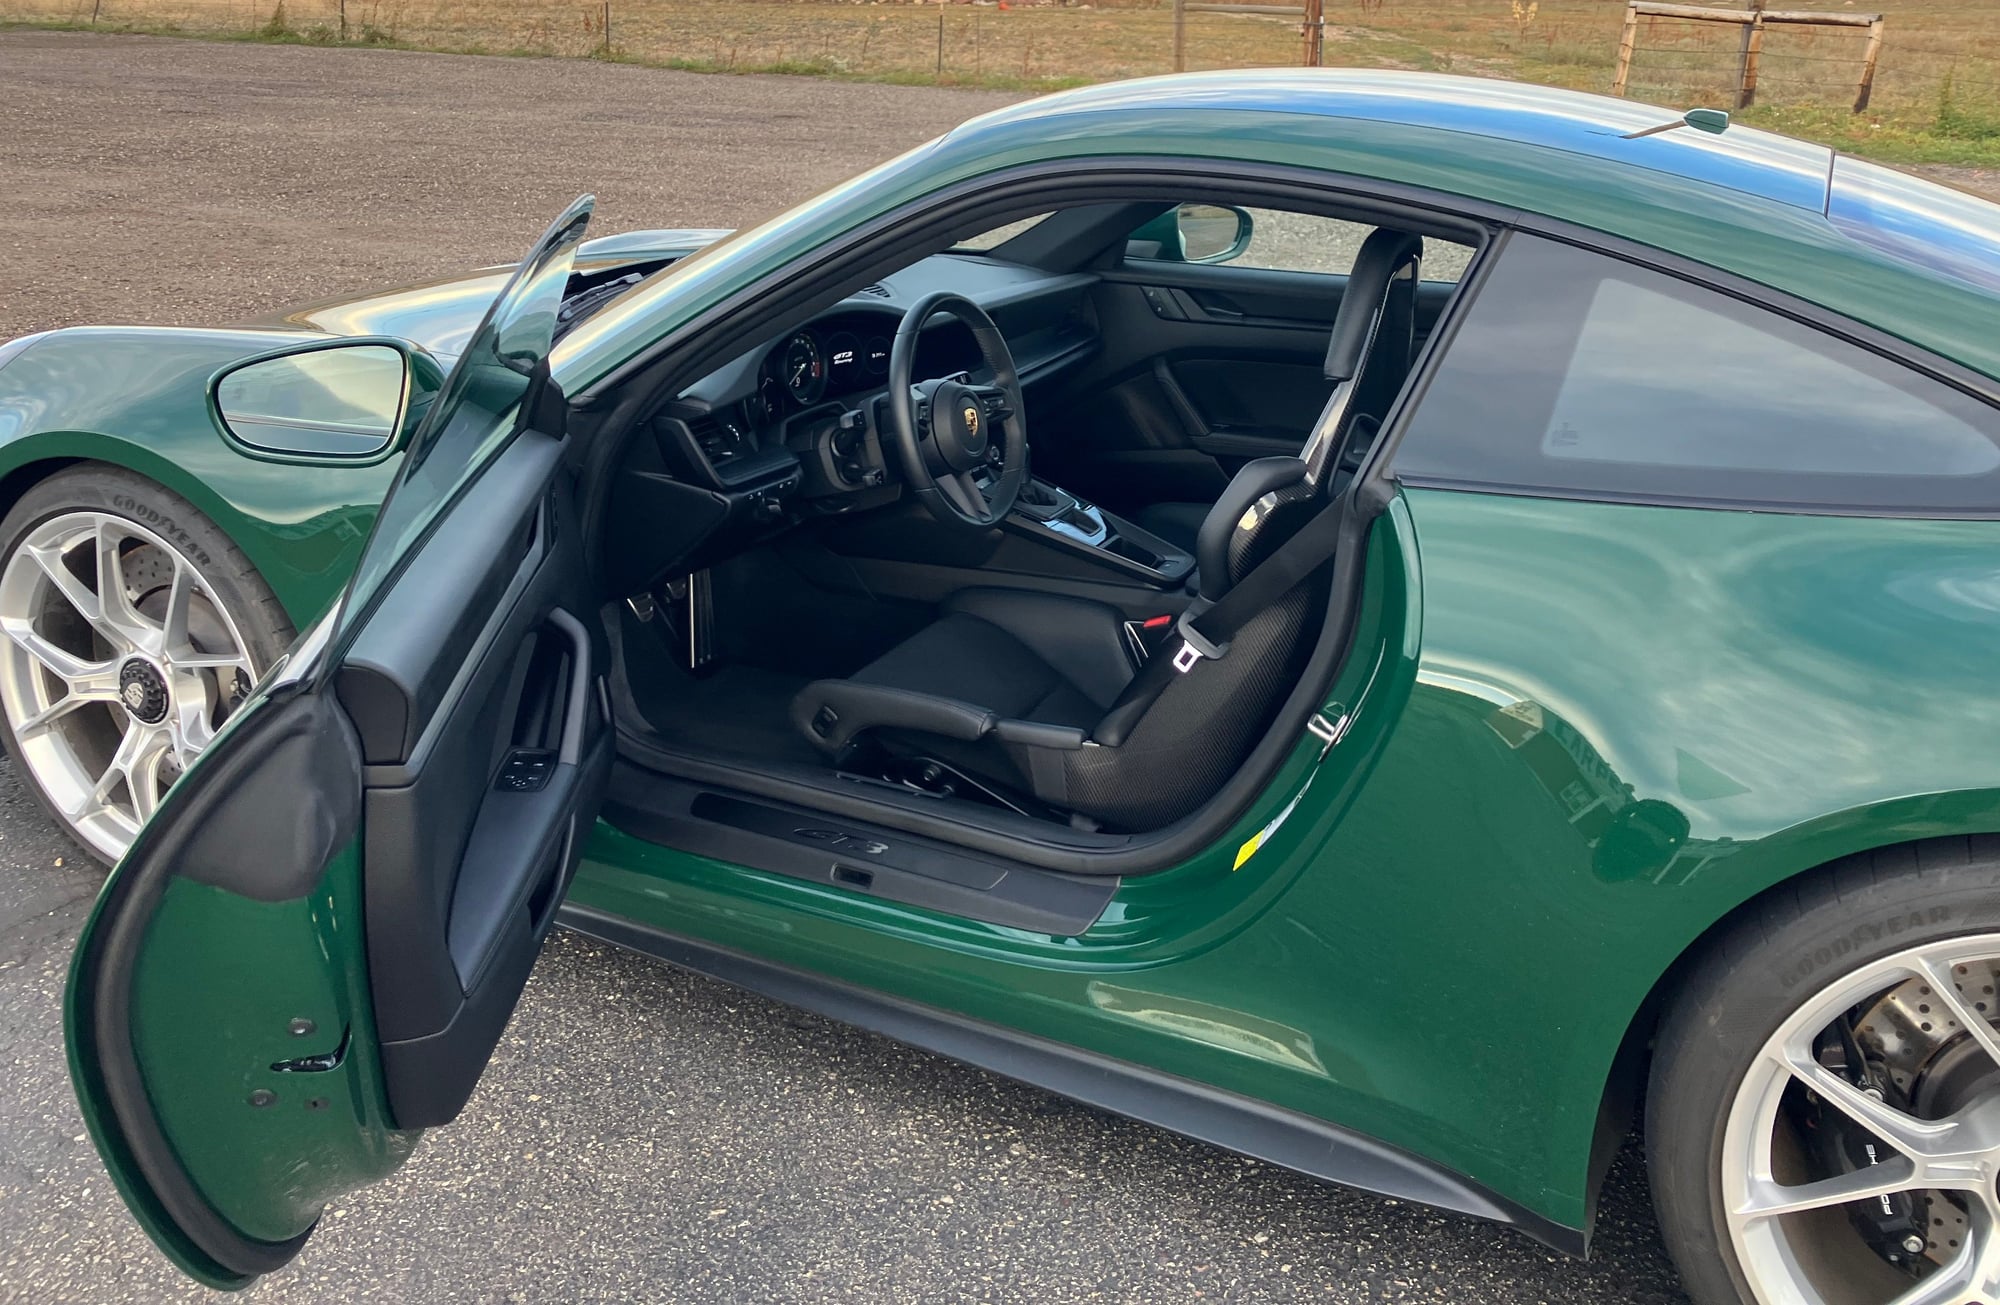 2022 Porsche 911 - 2022 Porsche 911 GT3 Touring in British Racing Green (PTS) - Used - VIN WP0AC2A98NS271064 - 3,800 Miles - 6 cyl - 2WD - Manual - Coupe - Other - Boulder, CO 80304, United States